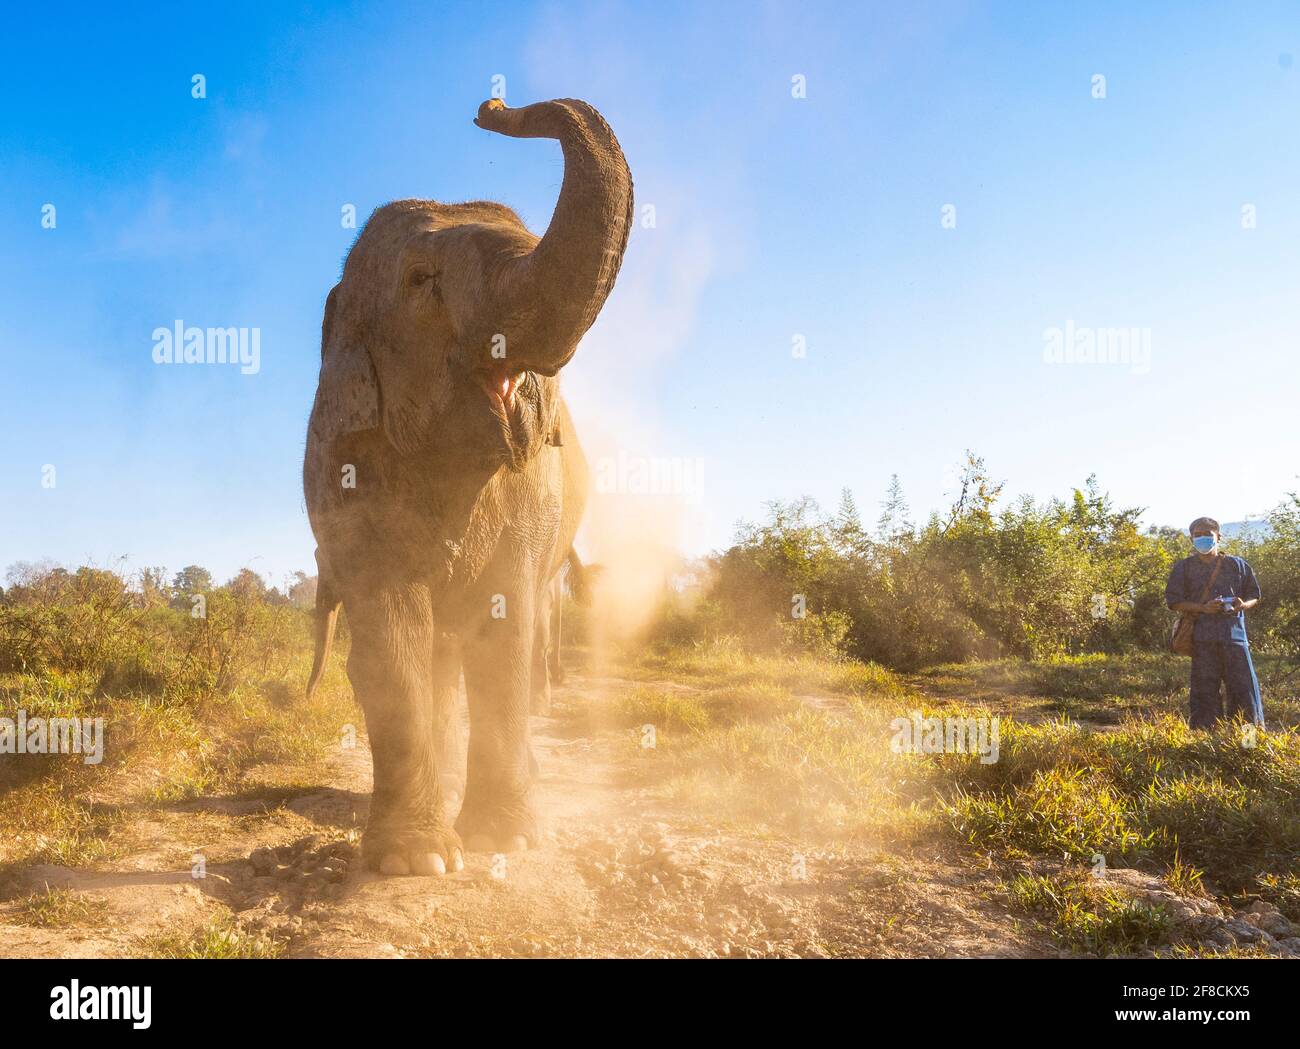 elephant throwing up dirt at animal sanctuary in the golden triangle Stock Photo